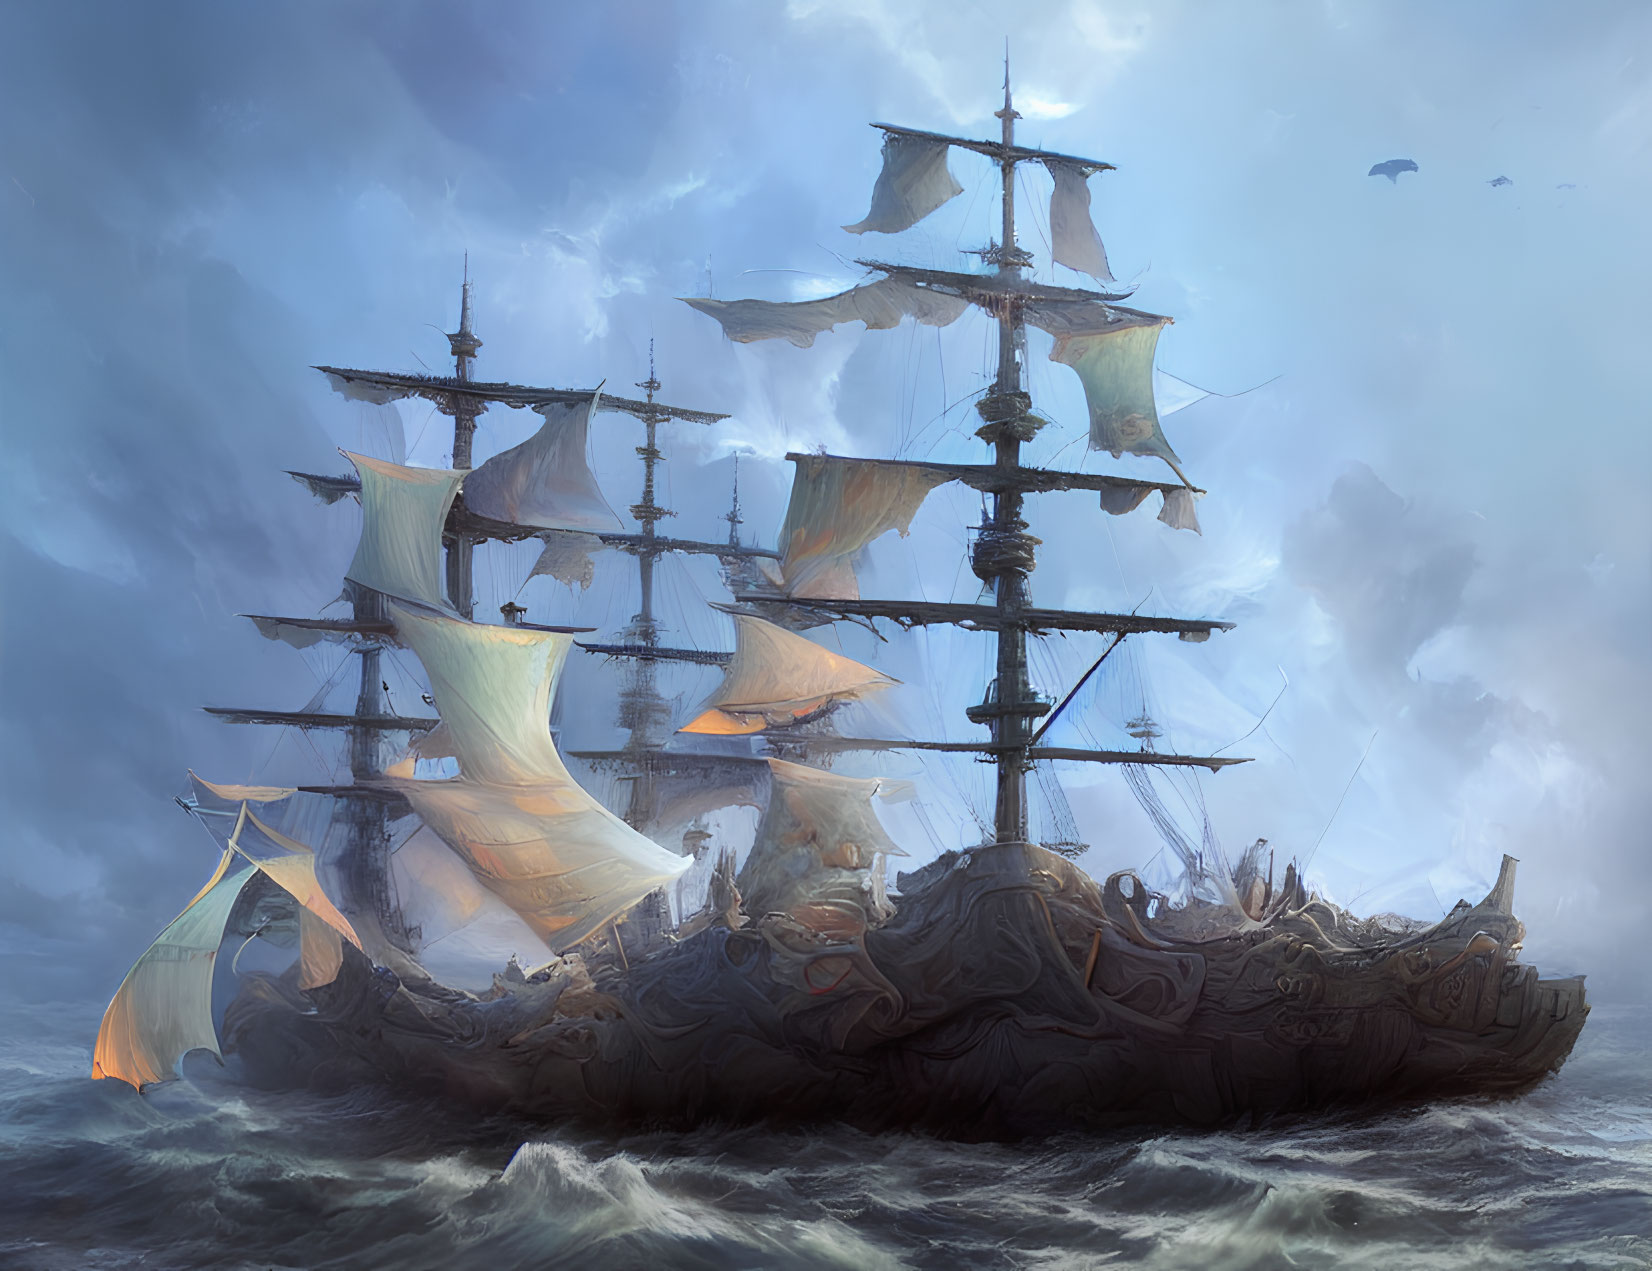 Ornate sailing ship with tattered sails in stormy sea